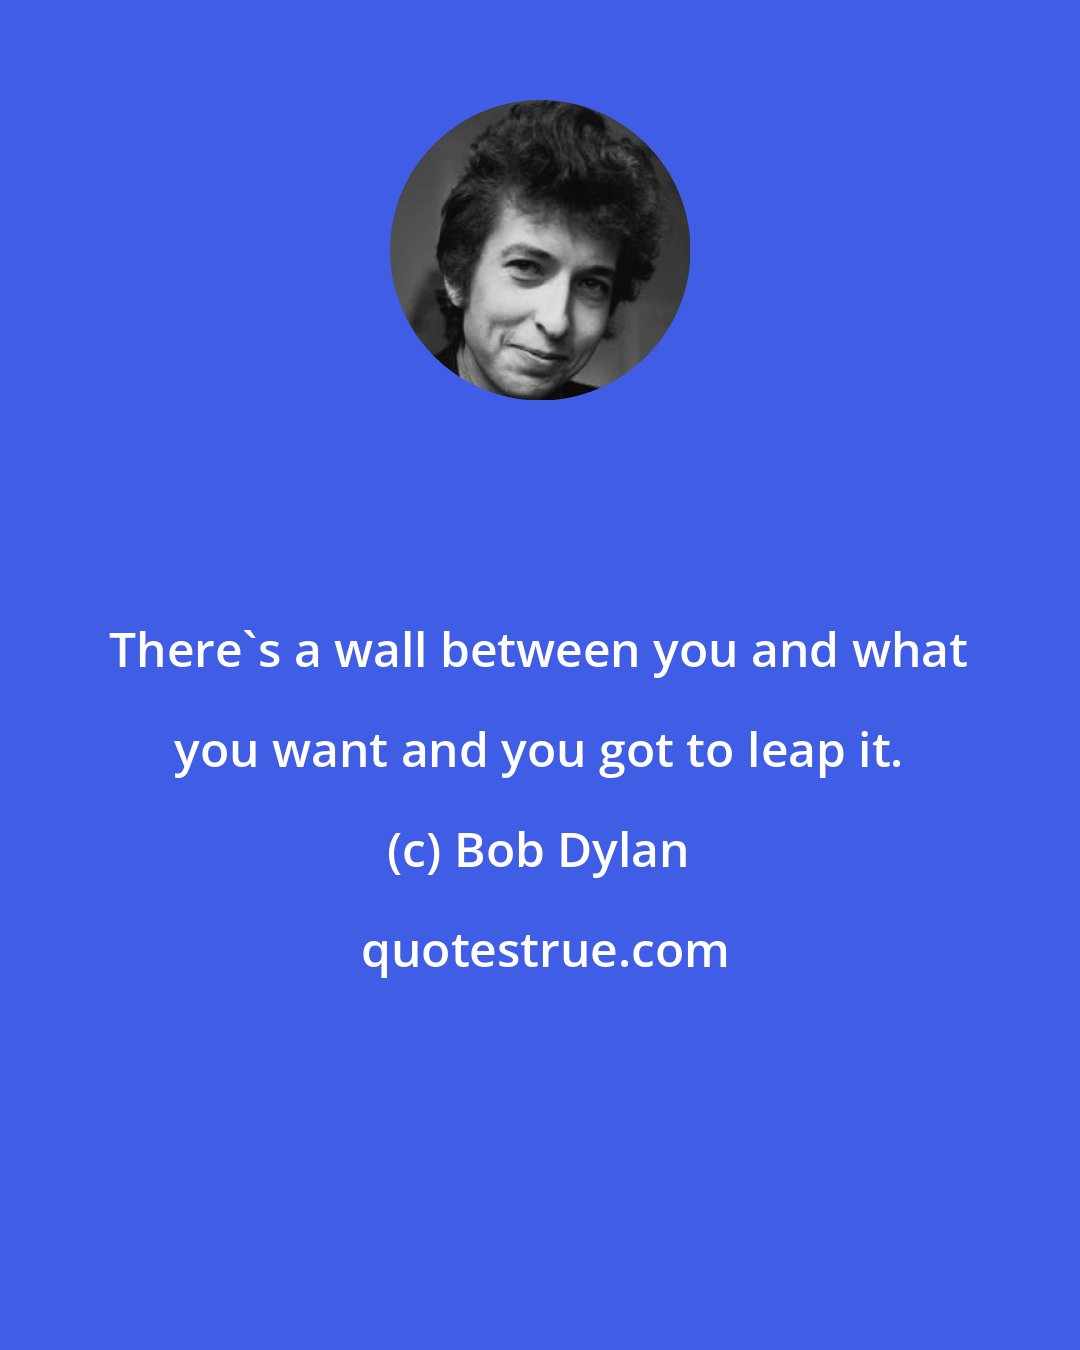 Bob Dylan: There's a wall between you and what you want and you got to leap it.